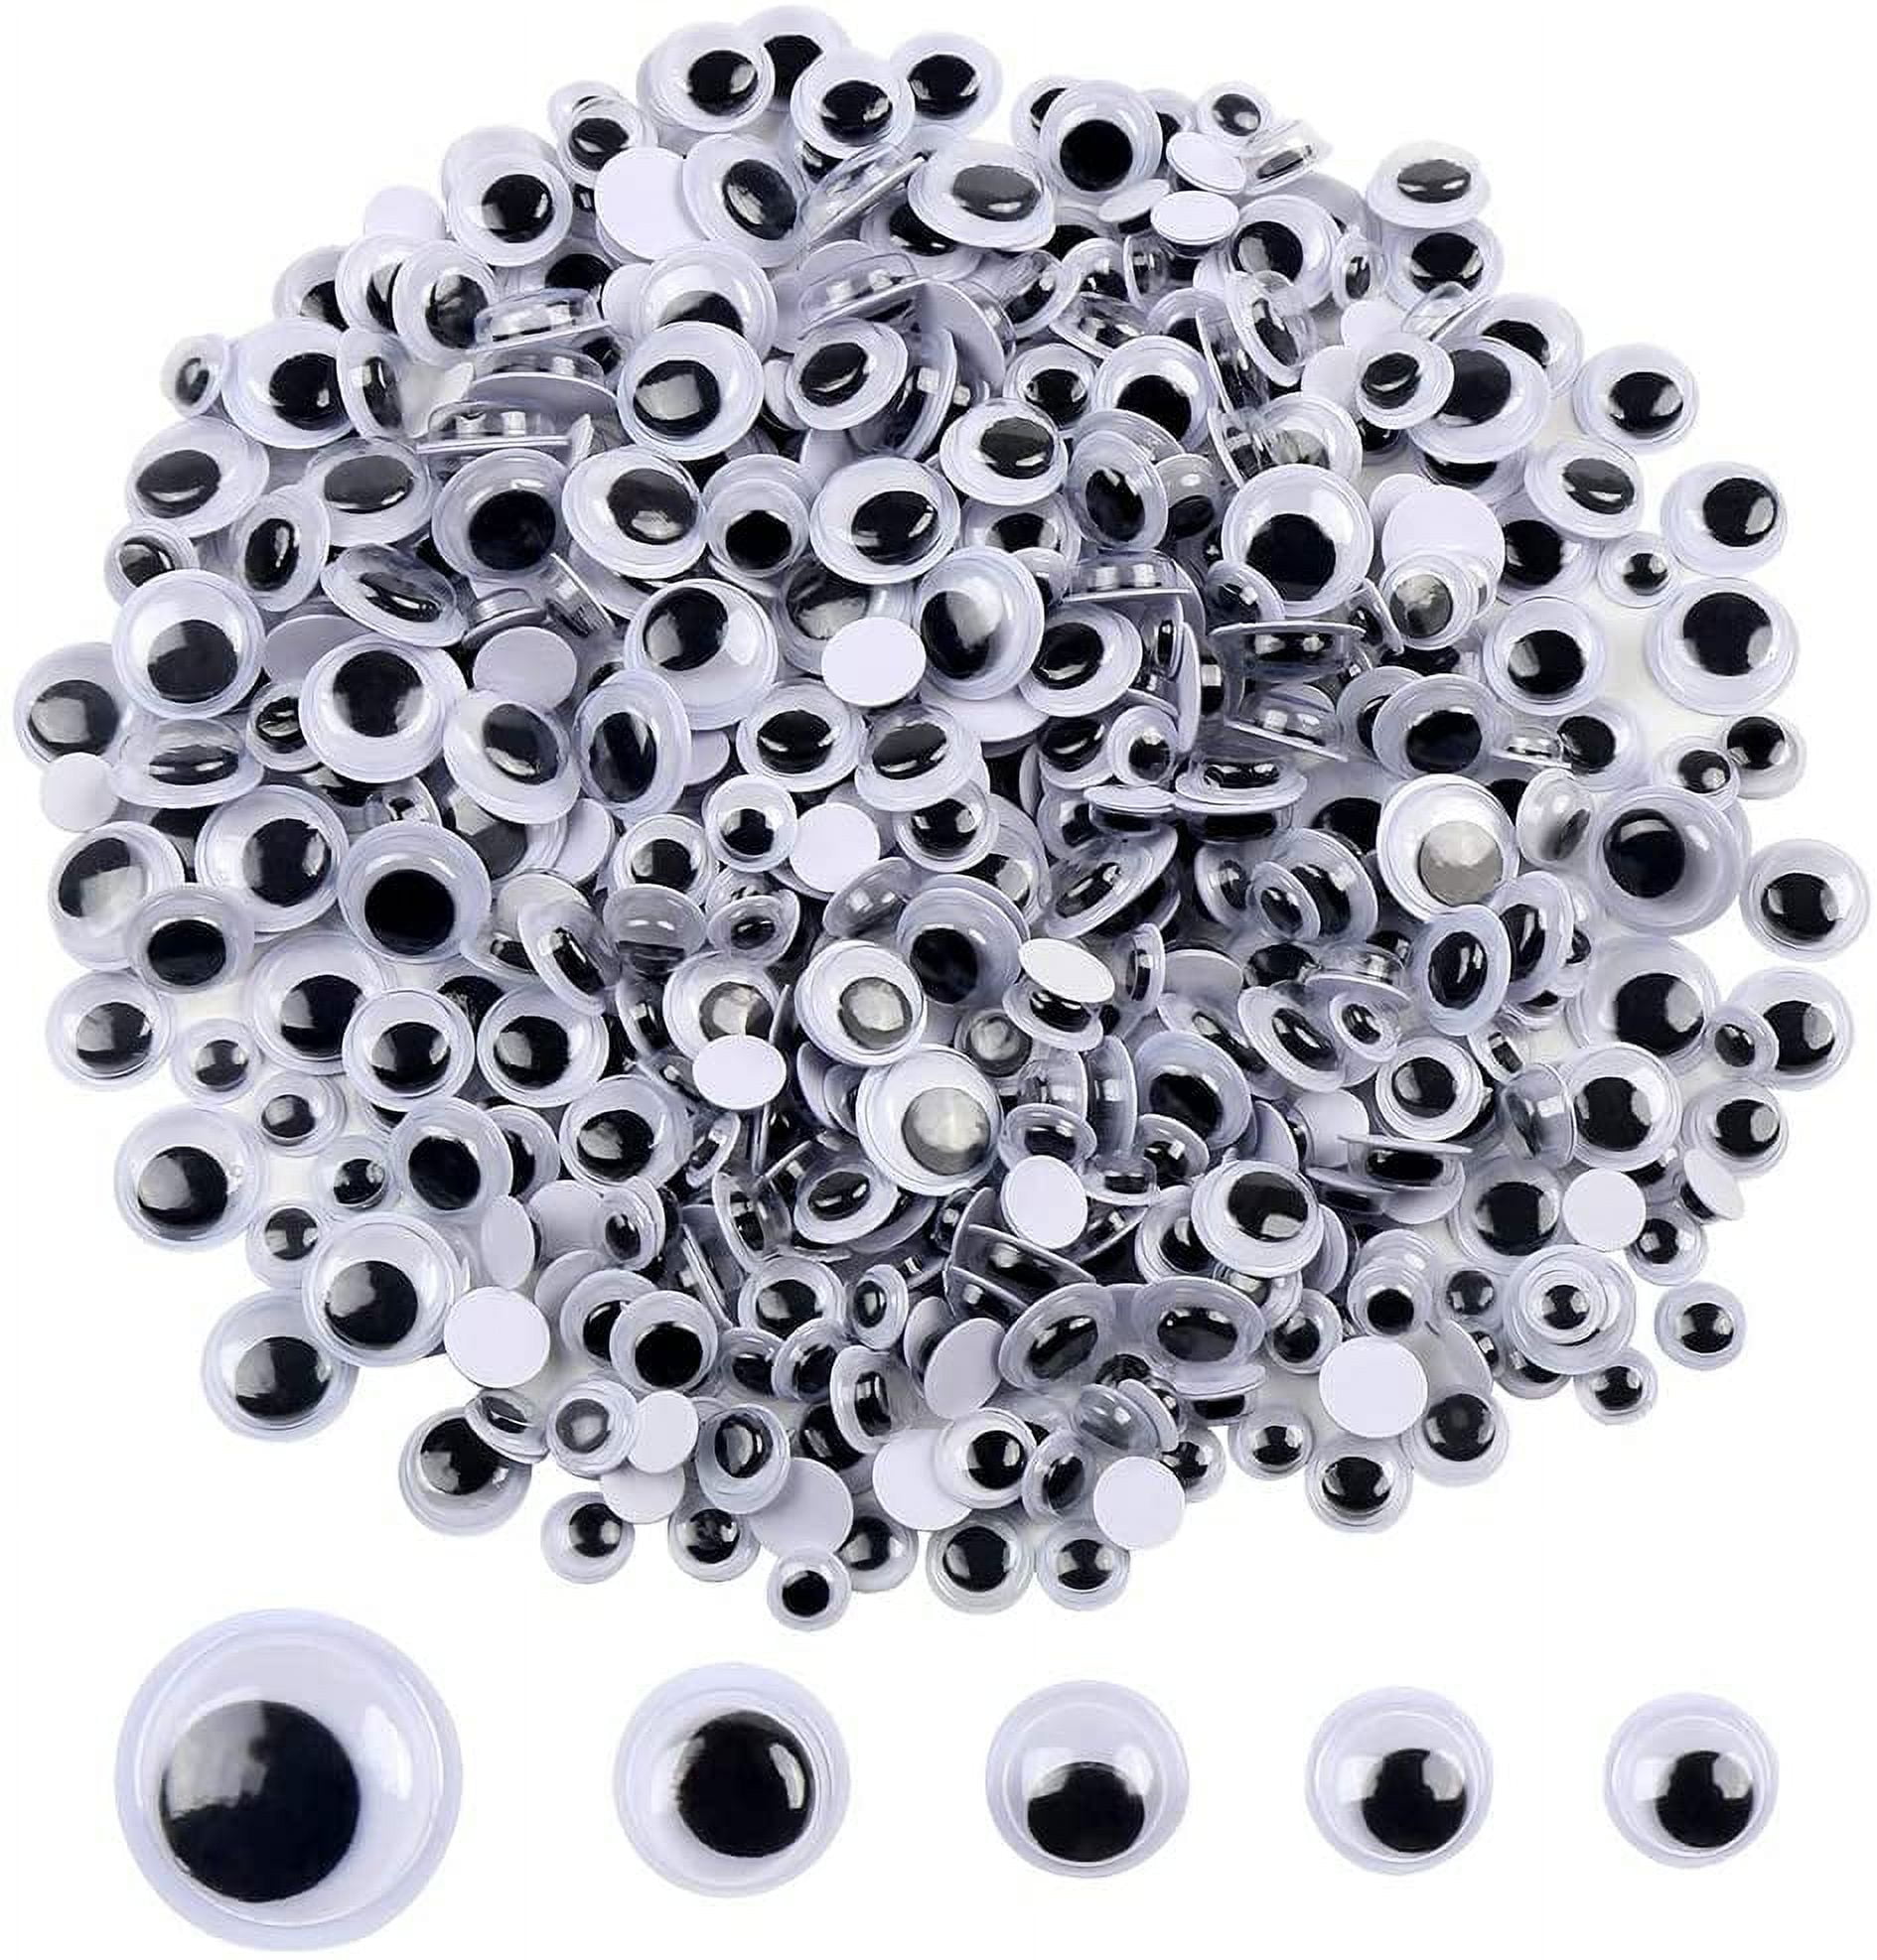 CCINEE 500 Pieces 6mm -12mm Black Wiggle Googly Eyes with Self-adhesive for  Crafts Decorations 